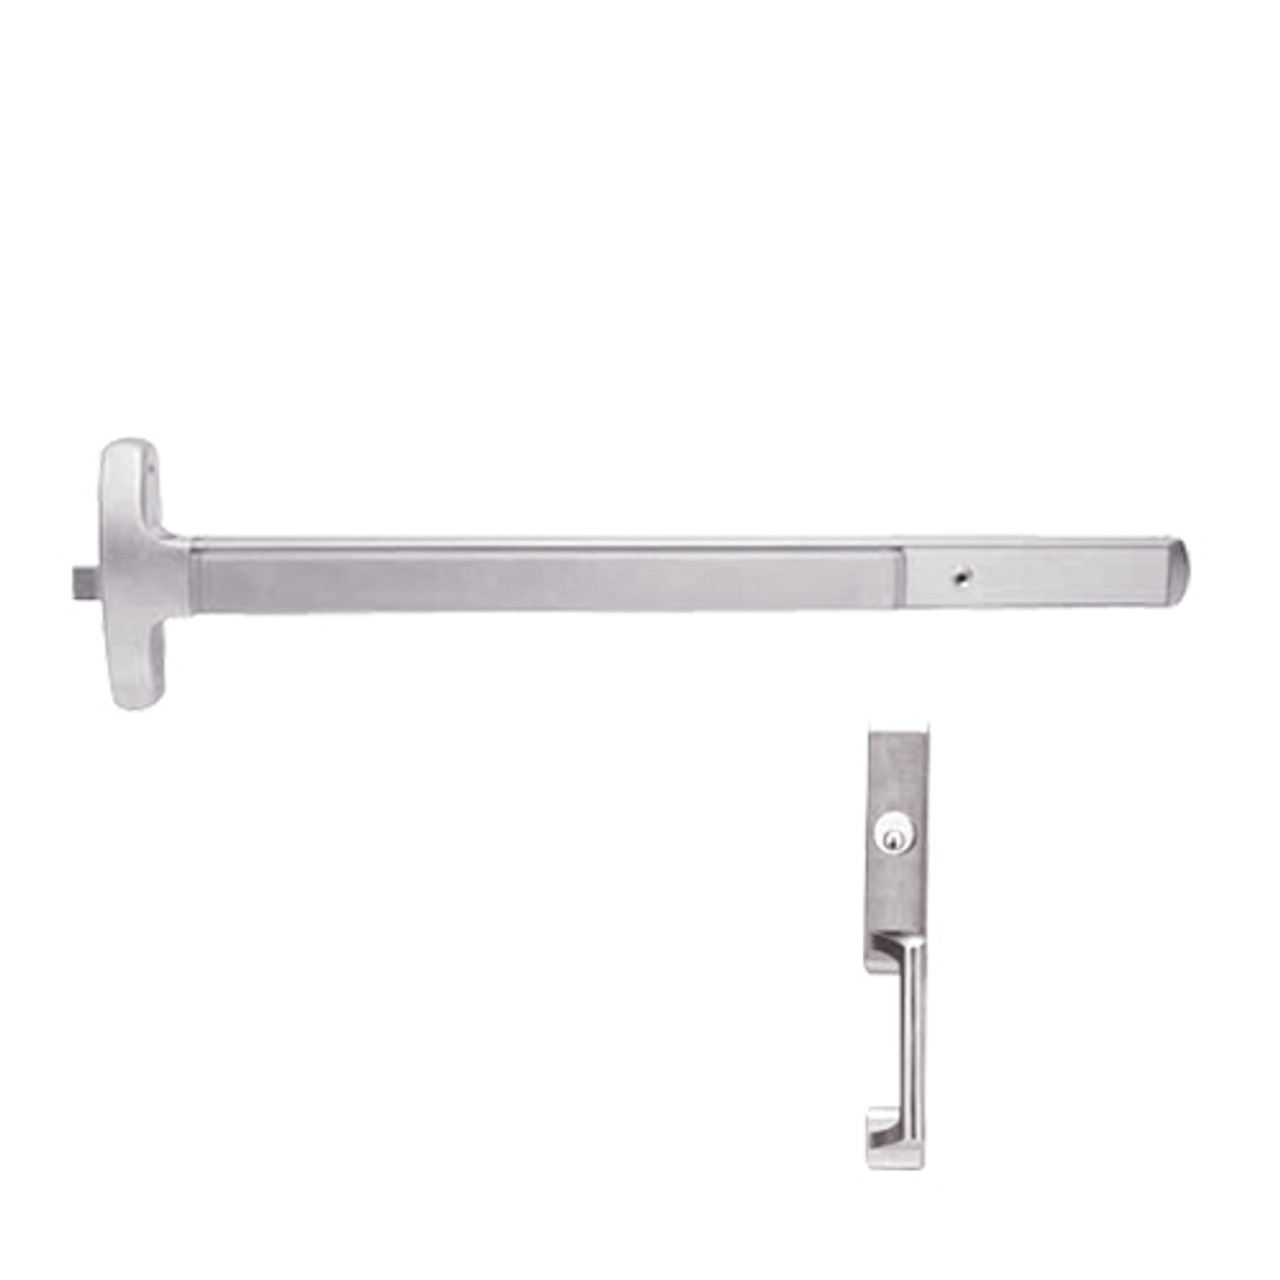 24-R-NL-US32-4-LHR Falcon Exit Device in Polished Stainless Steel